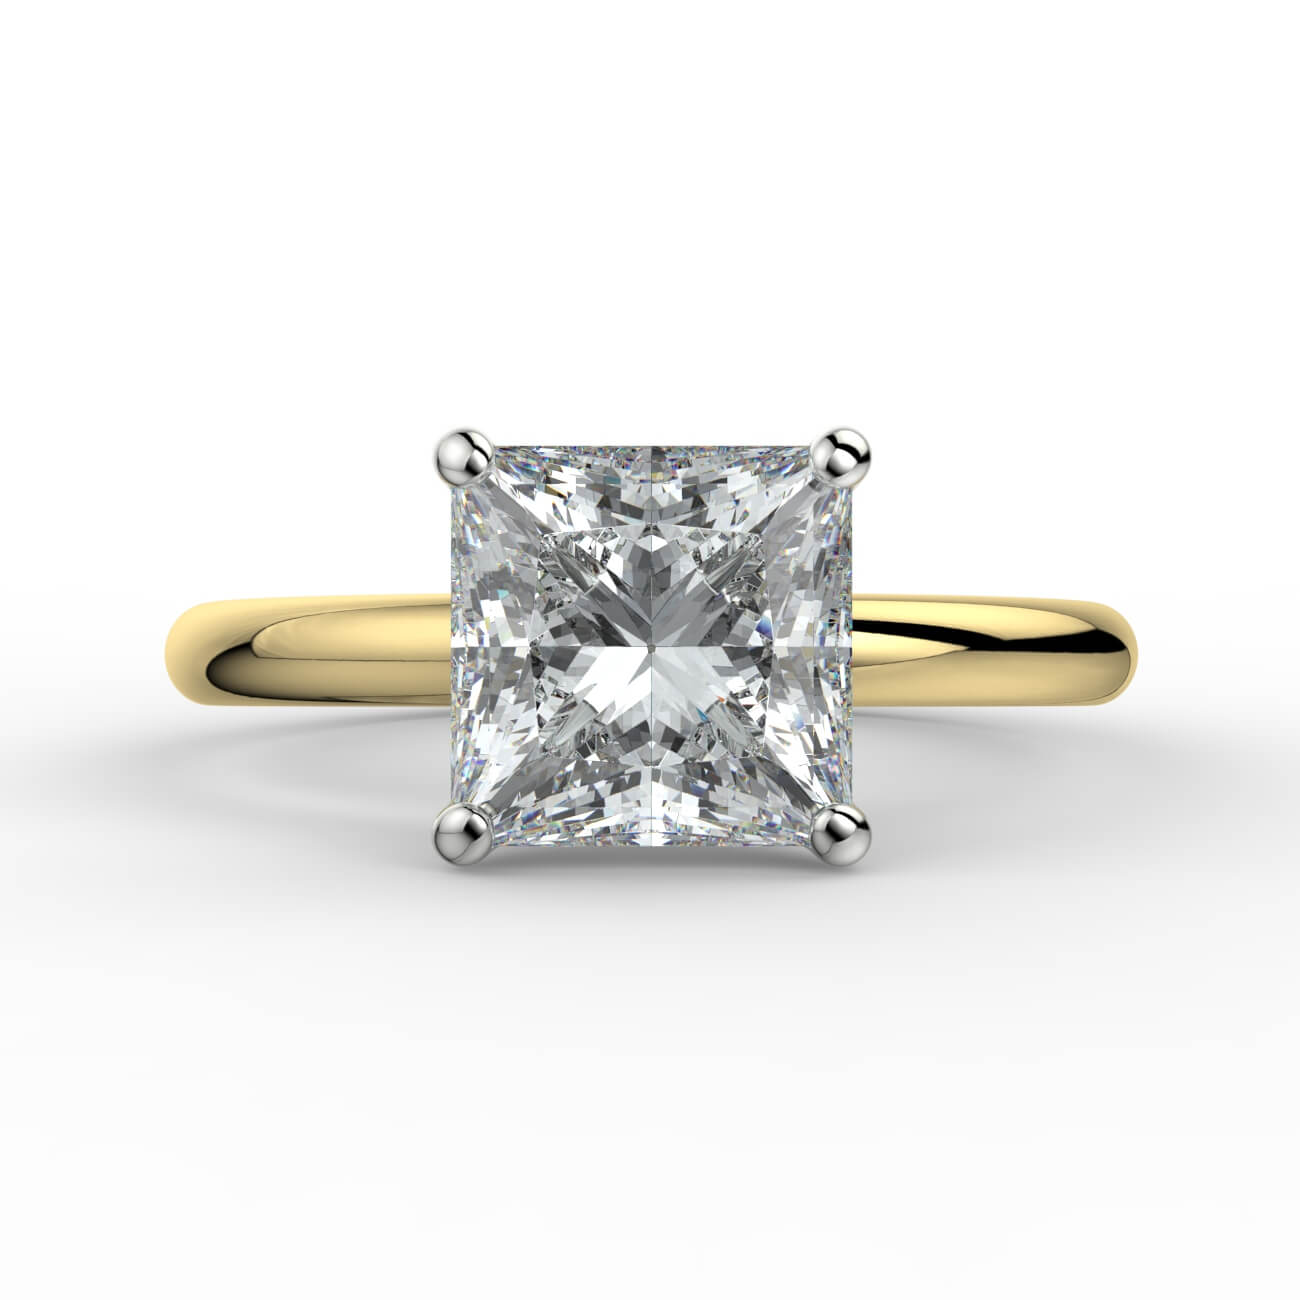 Comfort fit 4 claw princess cut solitaire diamond ring in yellow and white gold – Australian Diamond Network